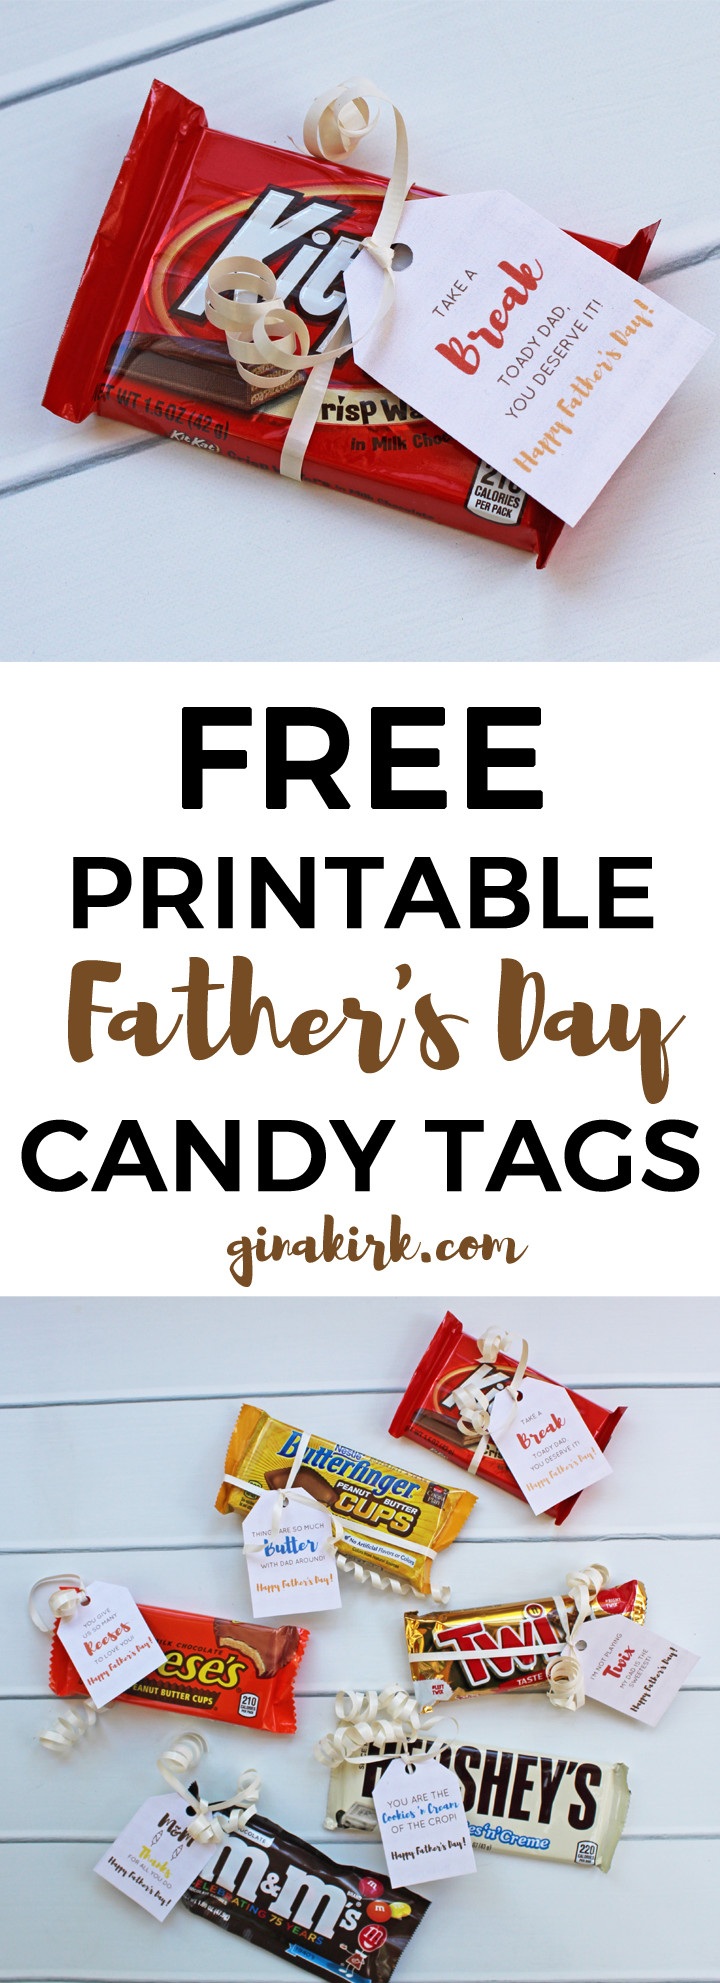 Fathers Day Church Gift Ideas
 Free Printable Candy Tags for Father s Day